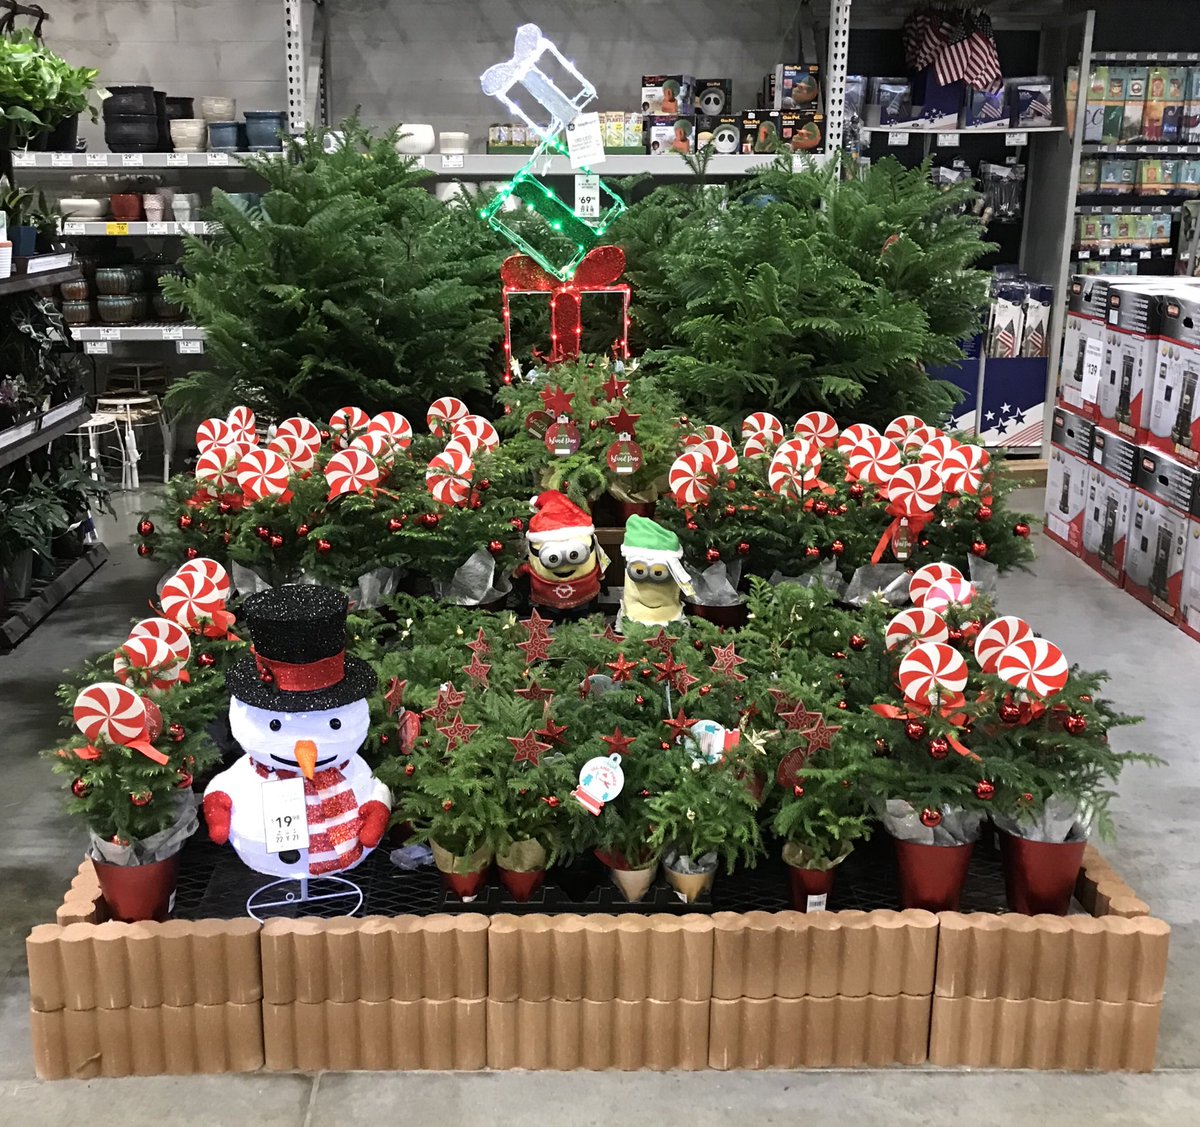 Come see us at the Lowe’s in Georgetown Kentucky! We’ve got everything you need to get ready for the holidays! #norfolkpine #christmas #airpurifying @plantpartners